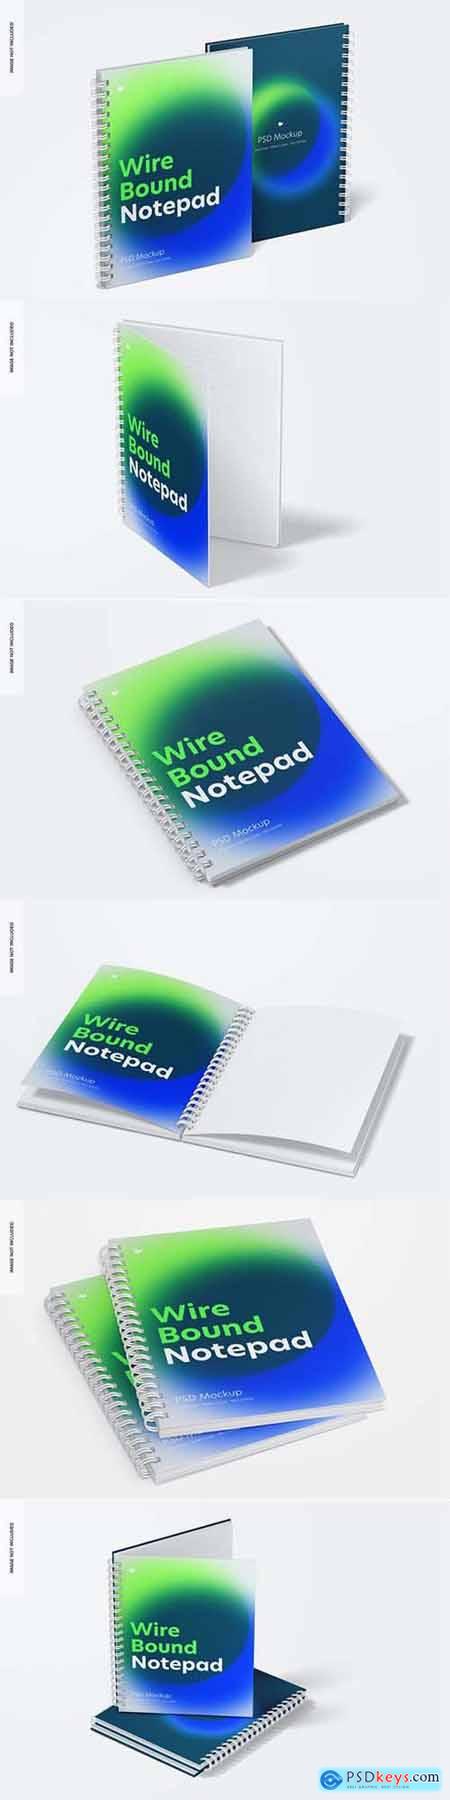 Plastic Cover Wire Bound Notepads Mockup Free Download Photoshop Vector Stock Image Via Torrent Zippyshare From Psdkeys Com